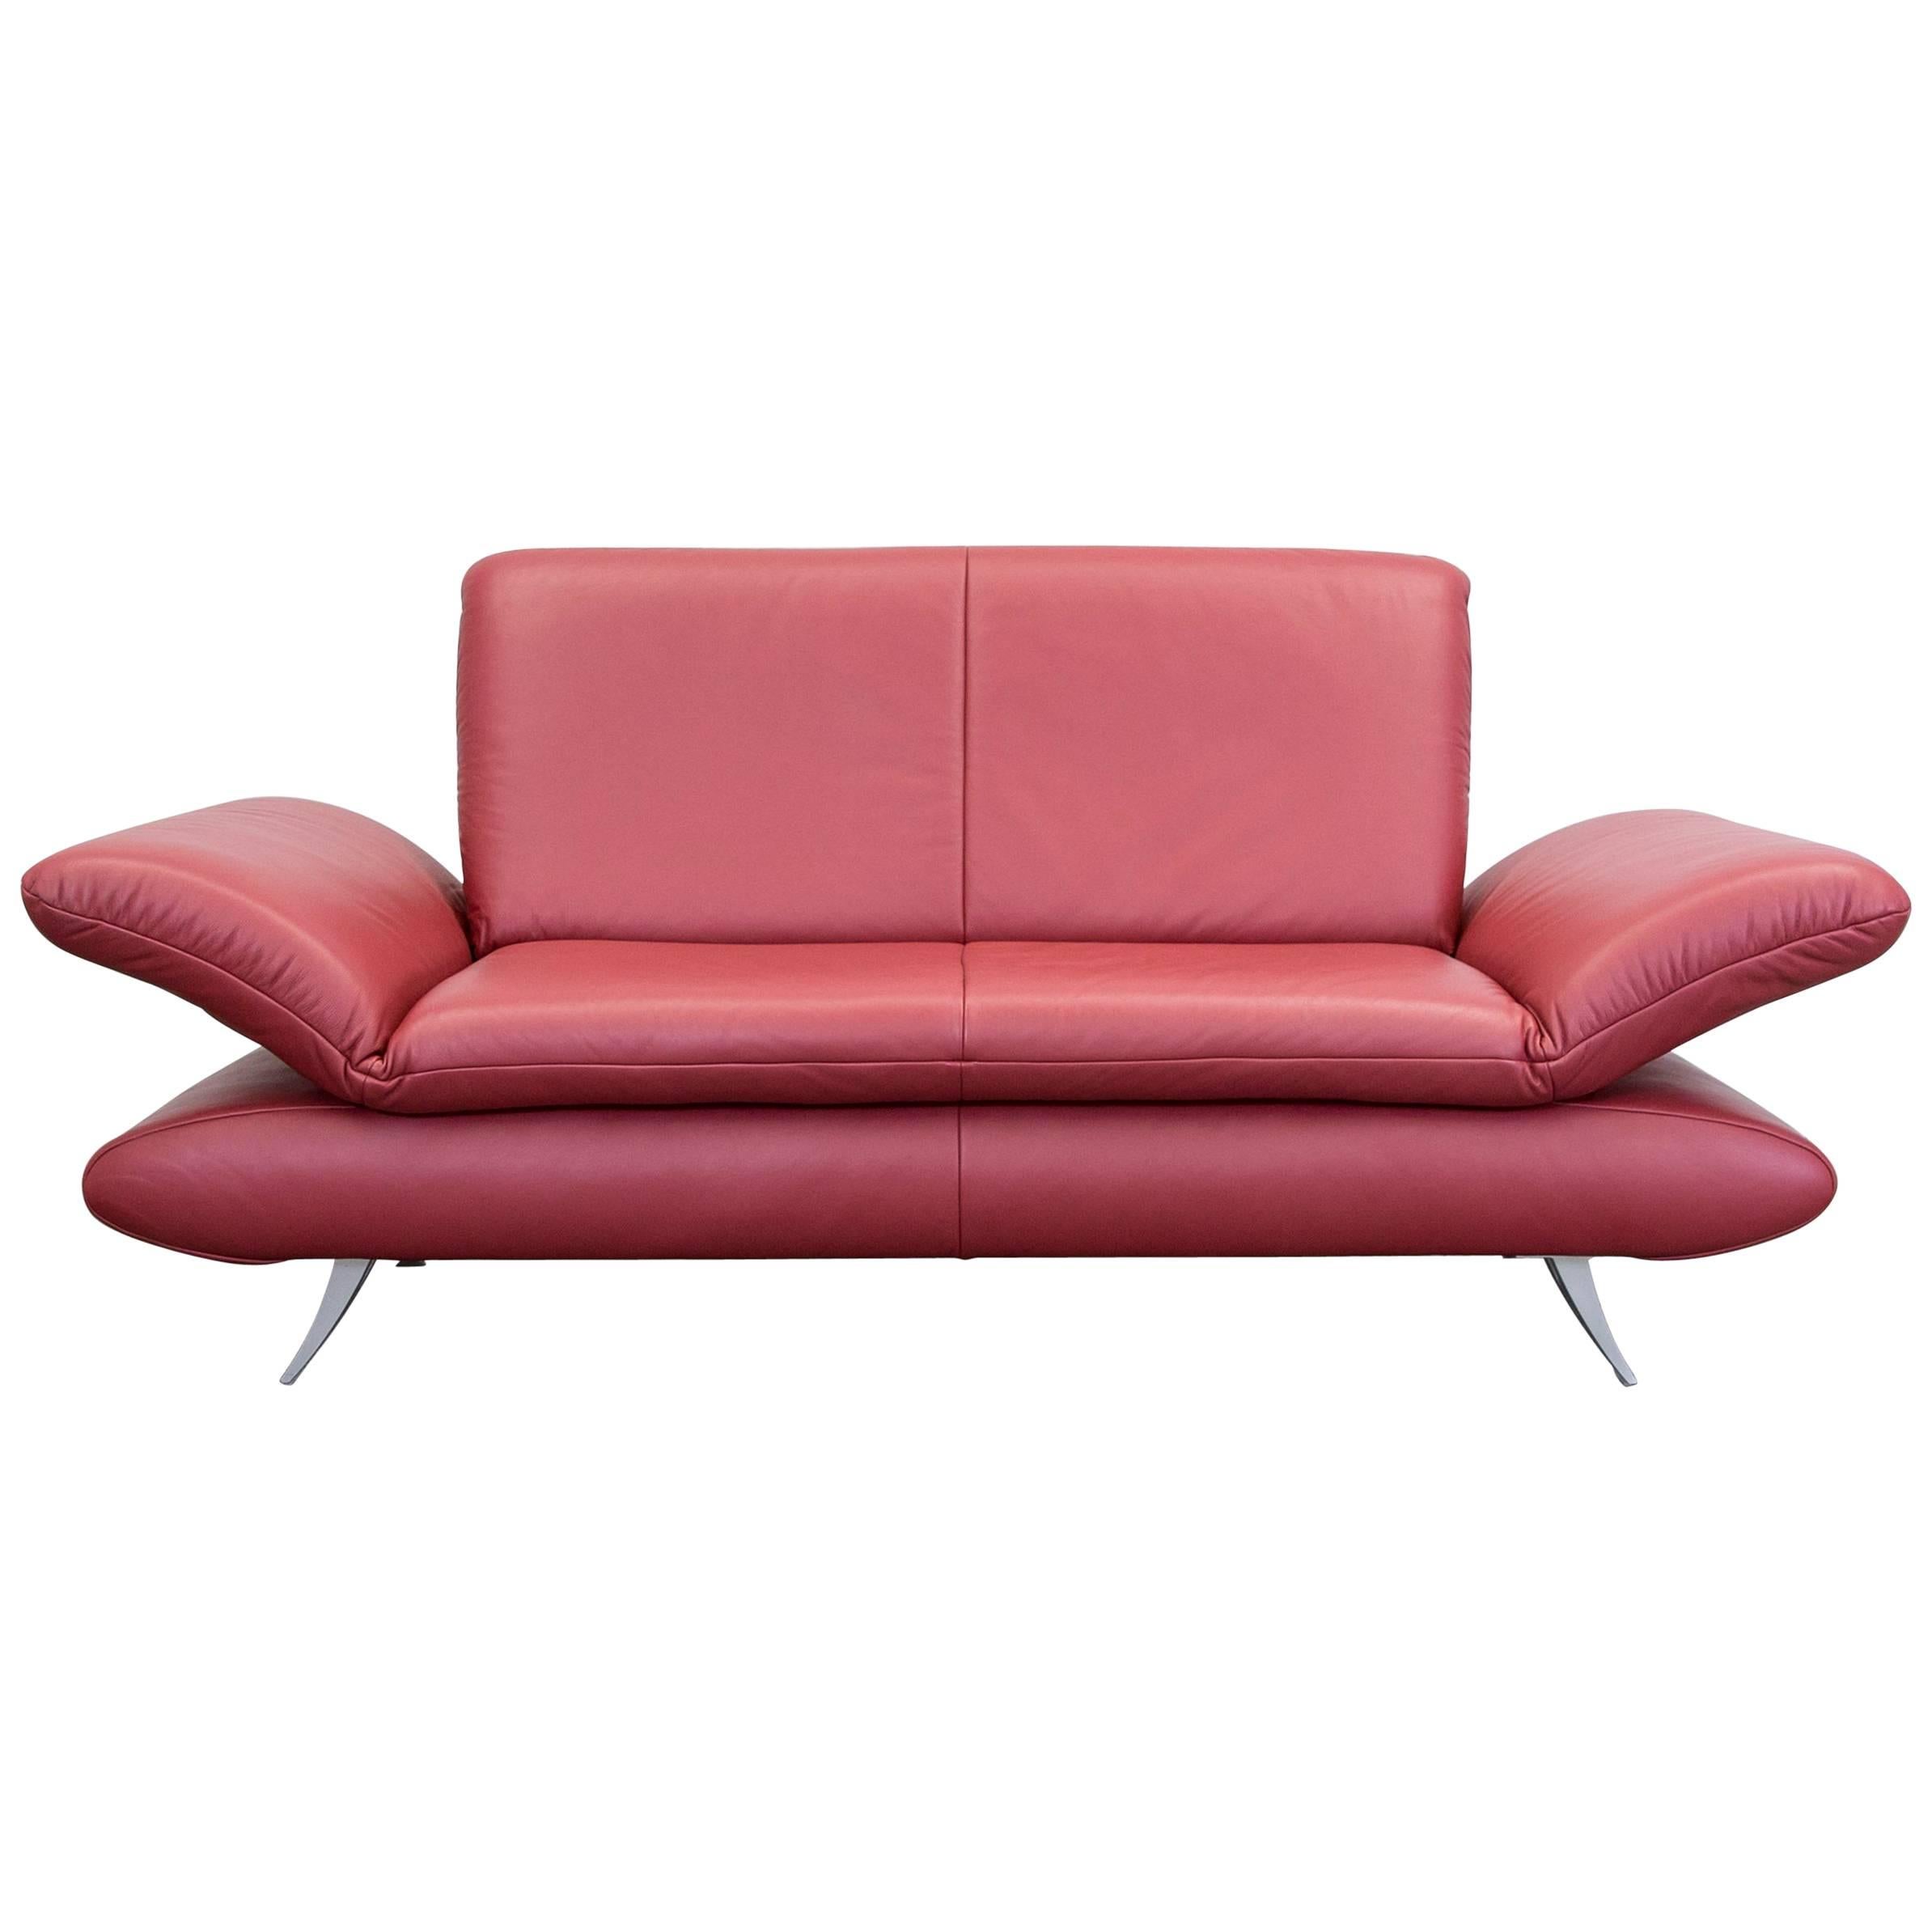 Koinor Rossini Designer Sofa Red Full Leather Two-Seat Function Modern